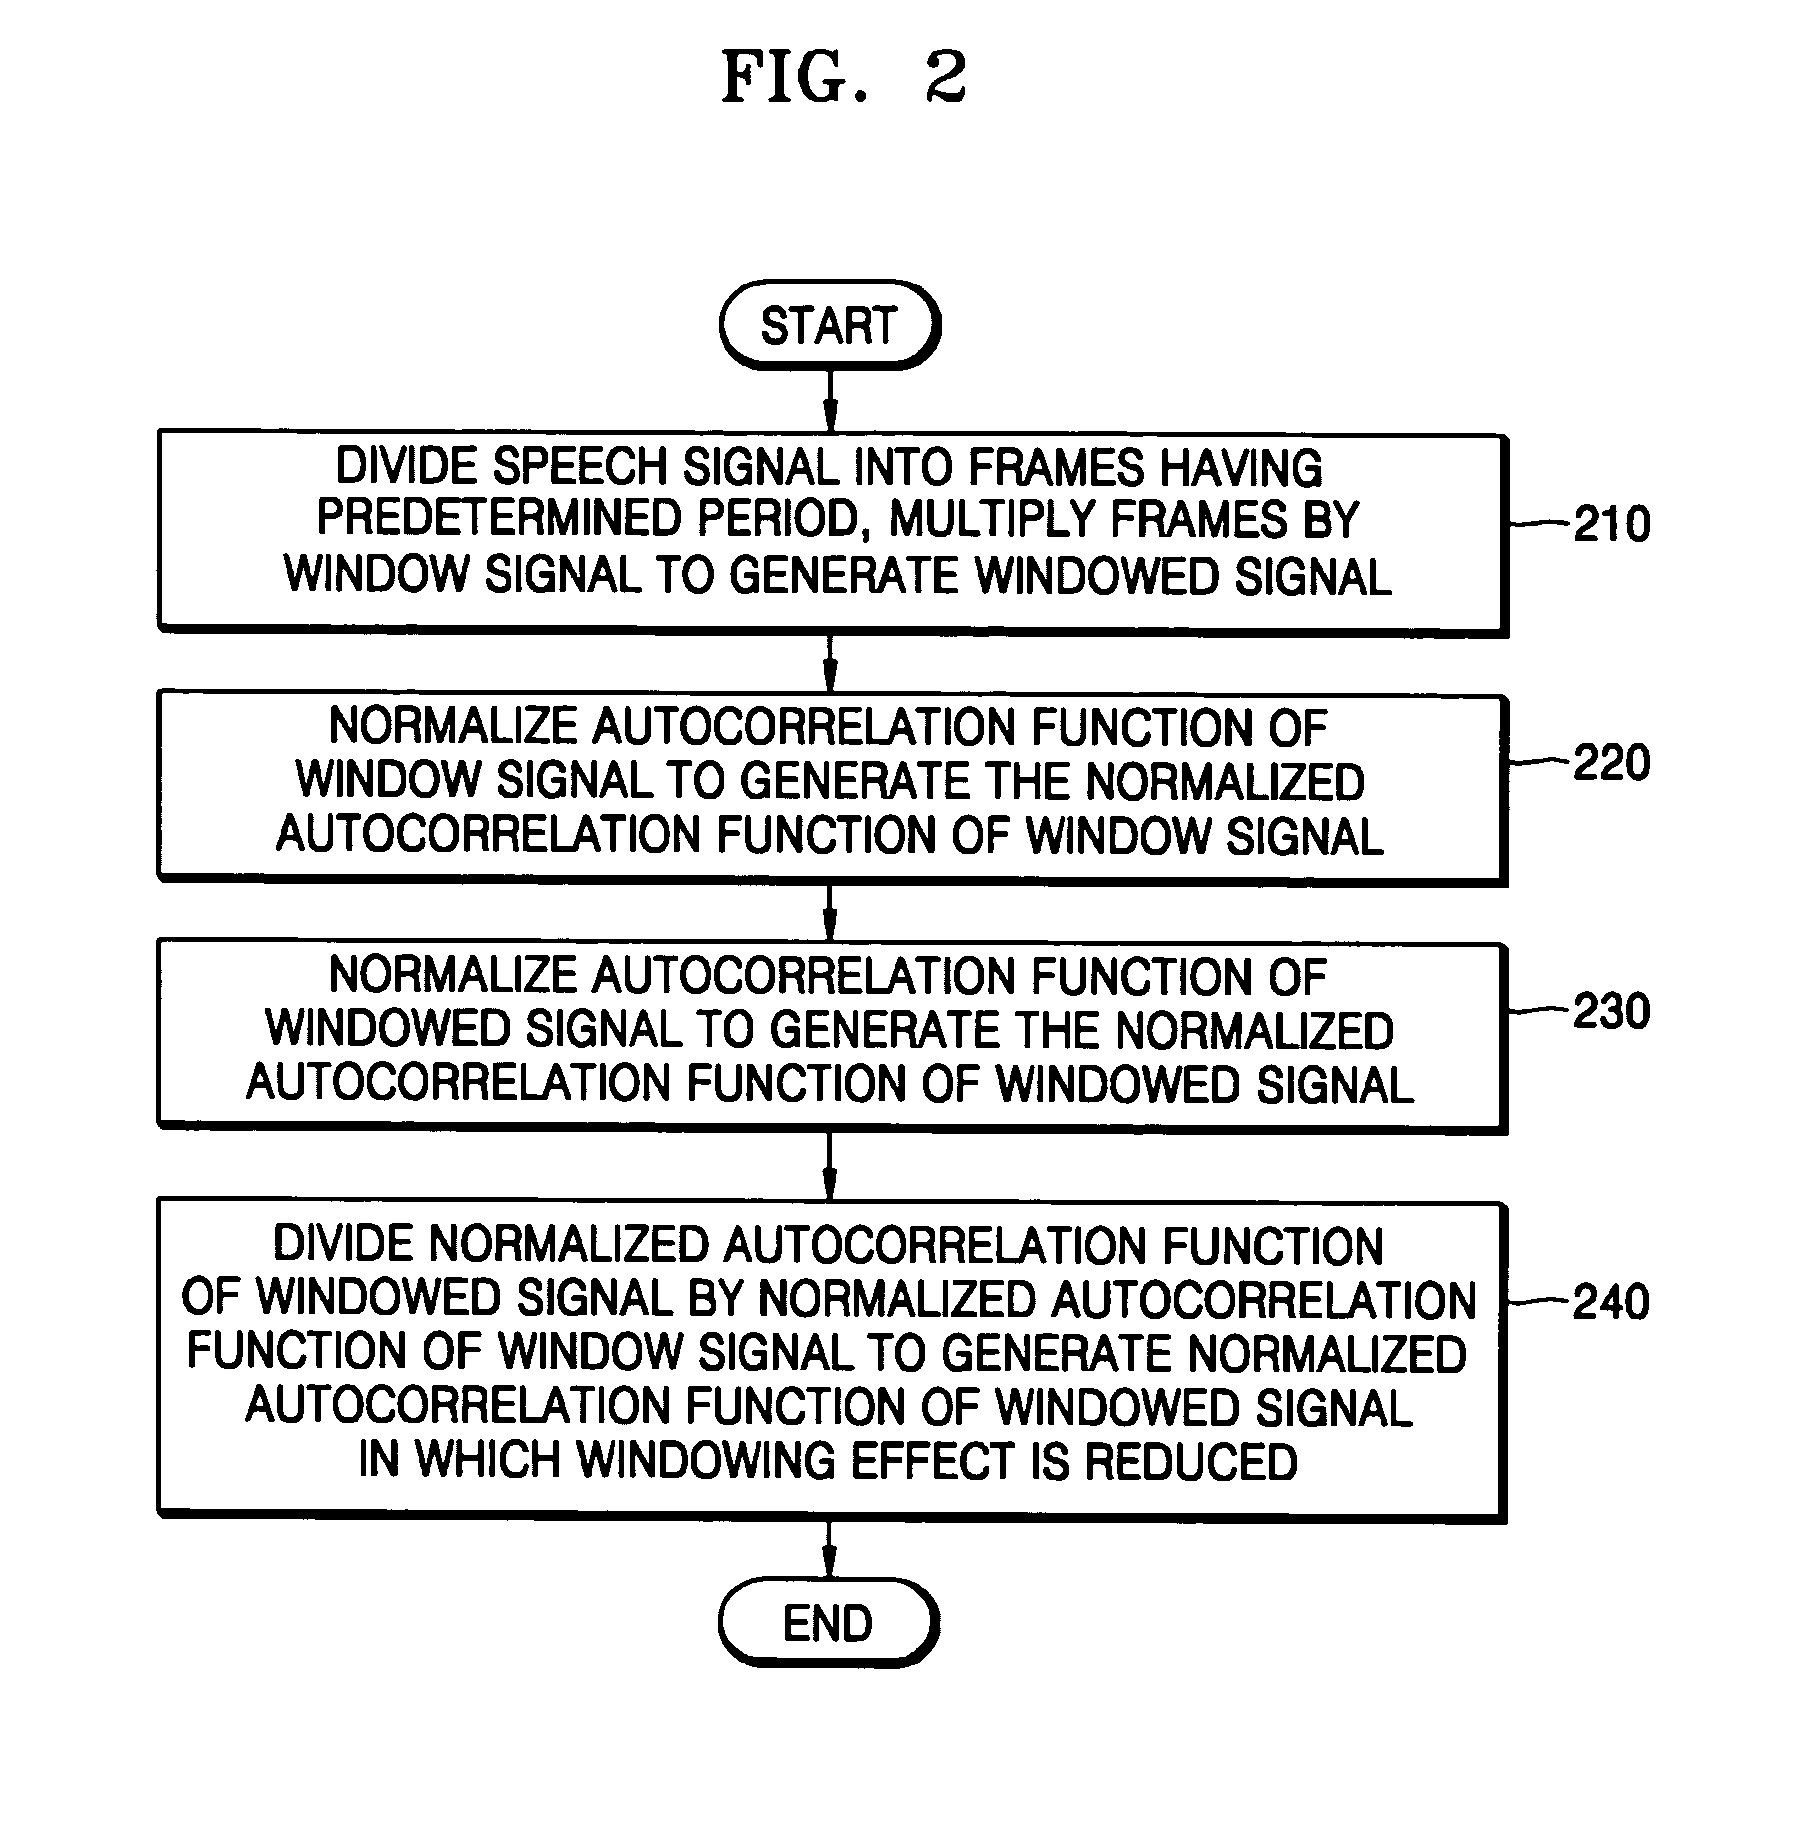 Method and apparatus for estimating pitch of signal